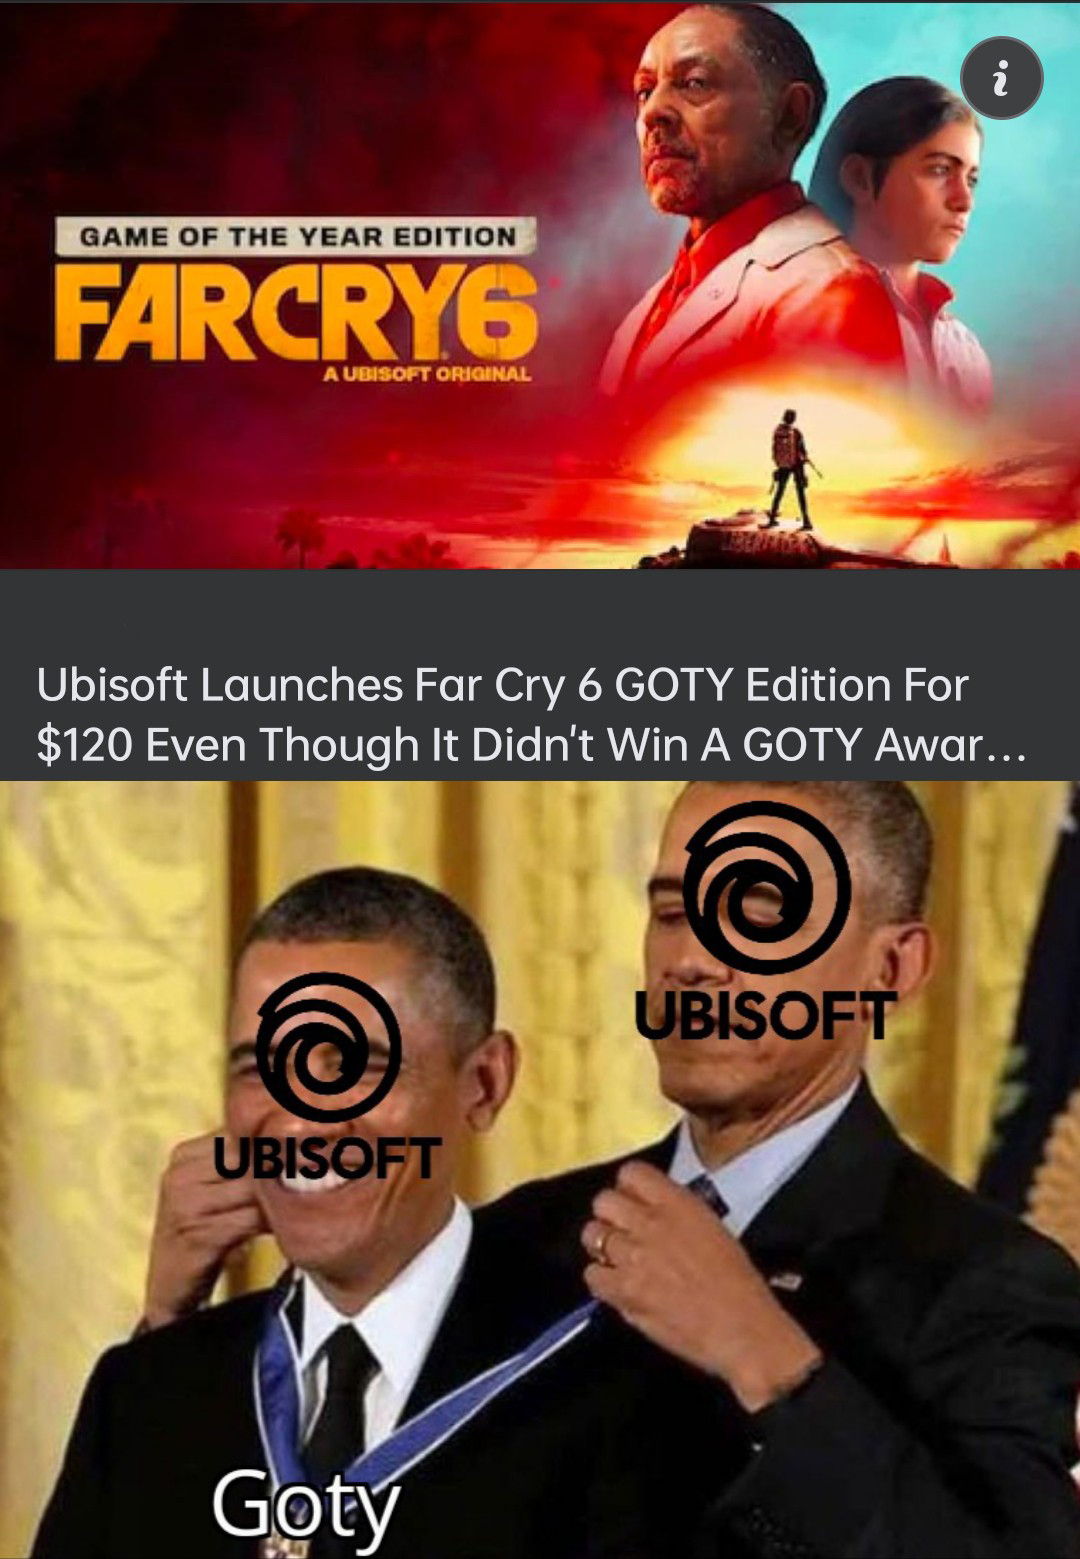 film - Game Of The Year Edition FARCRY6 A Ubisoft Original Ubisoft Launches Far Cry 6 Goty Edition For $120 Even Though It Didn't Win A Goty Awar... Ubisoft Goty Ubisoft